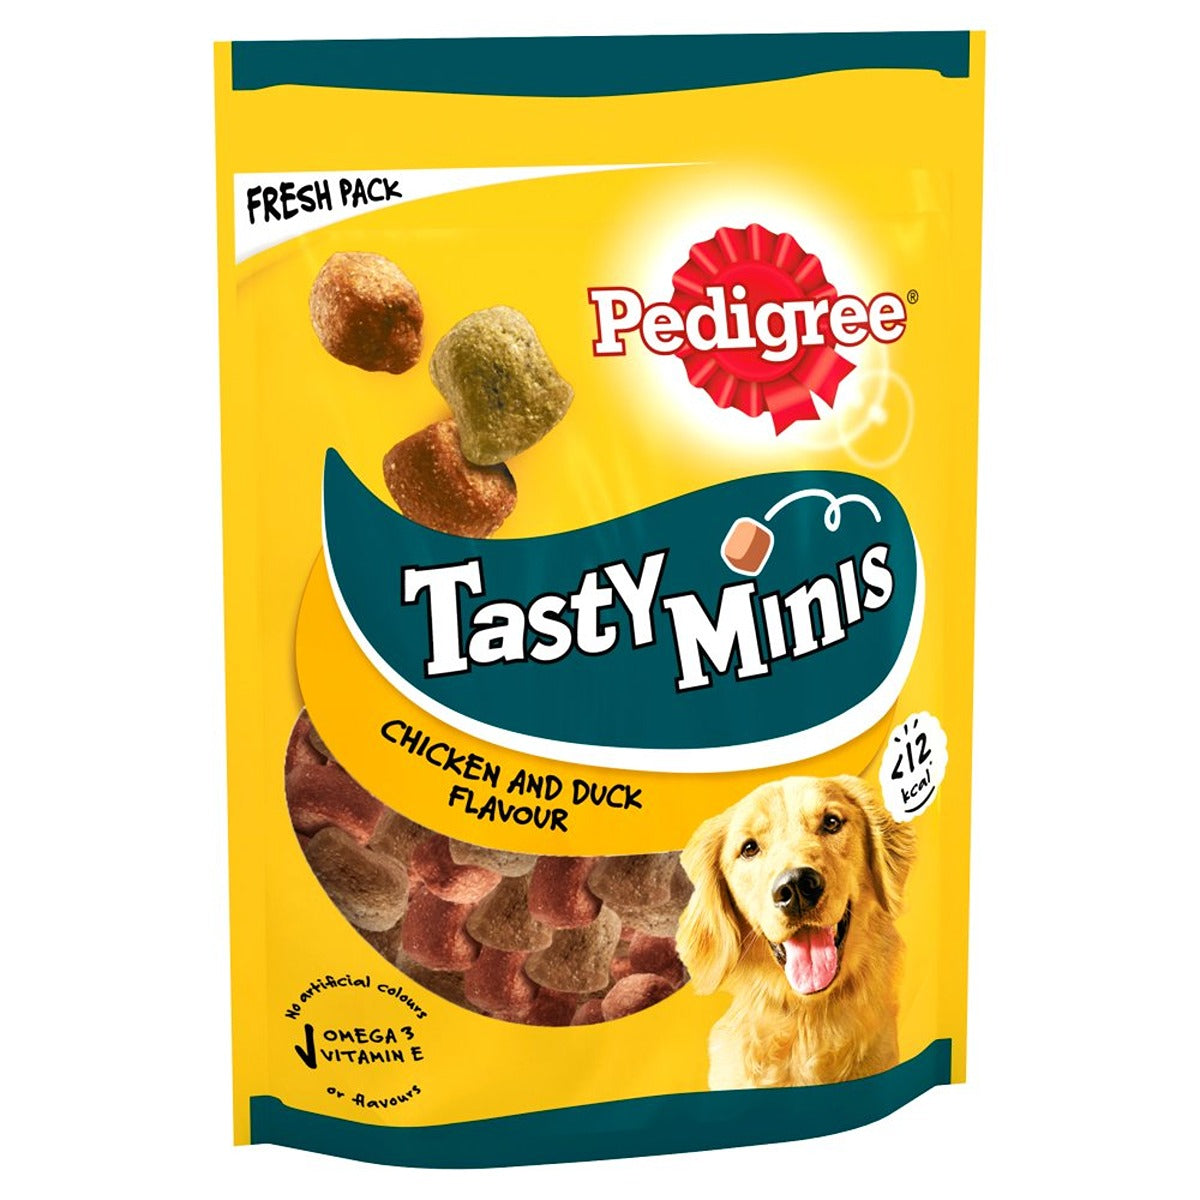 Pedigree Tasty Minis Adult Dog Treats Chicken & Duck Chewy Cubes - 130g.